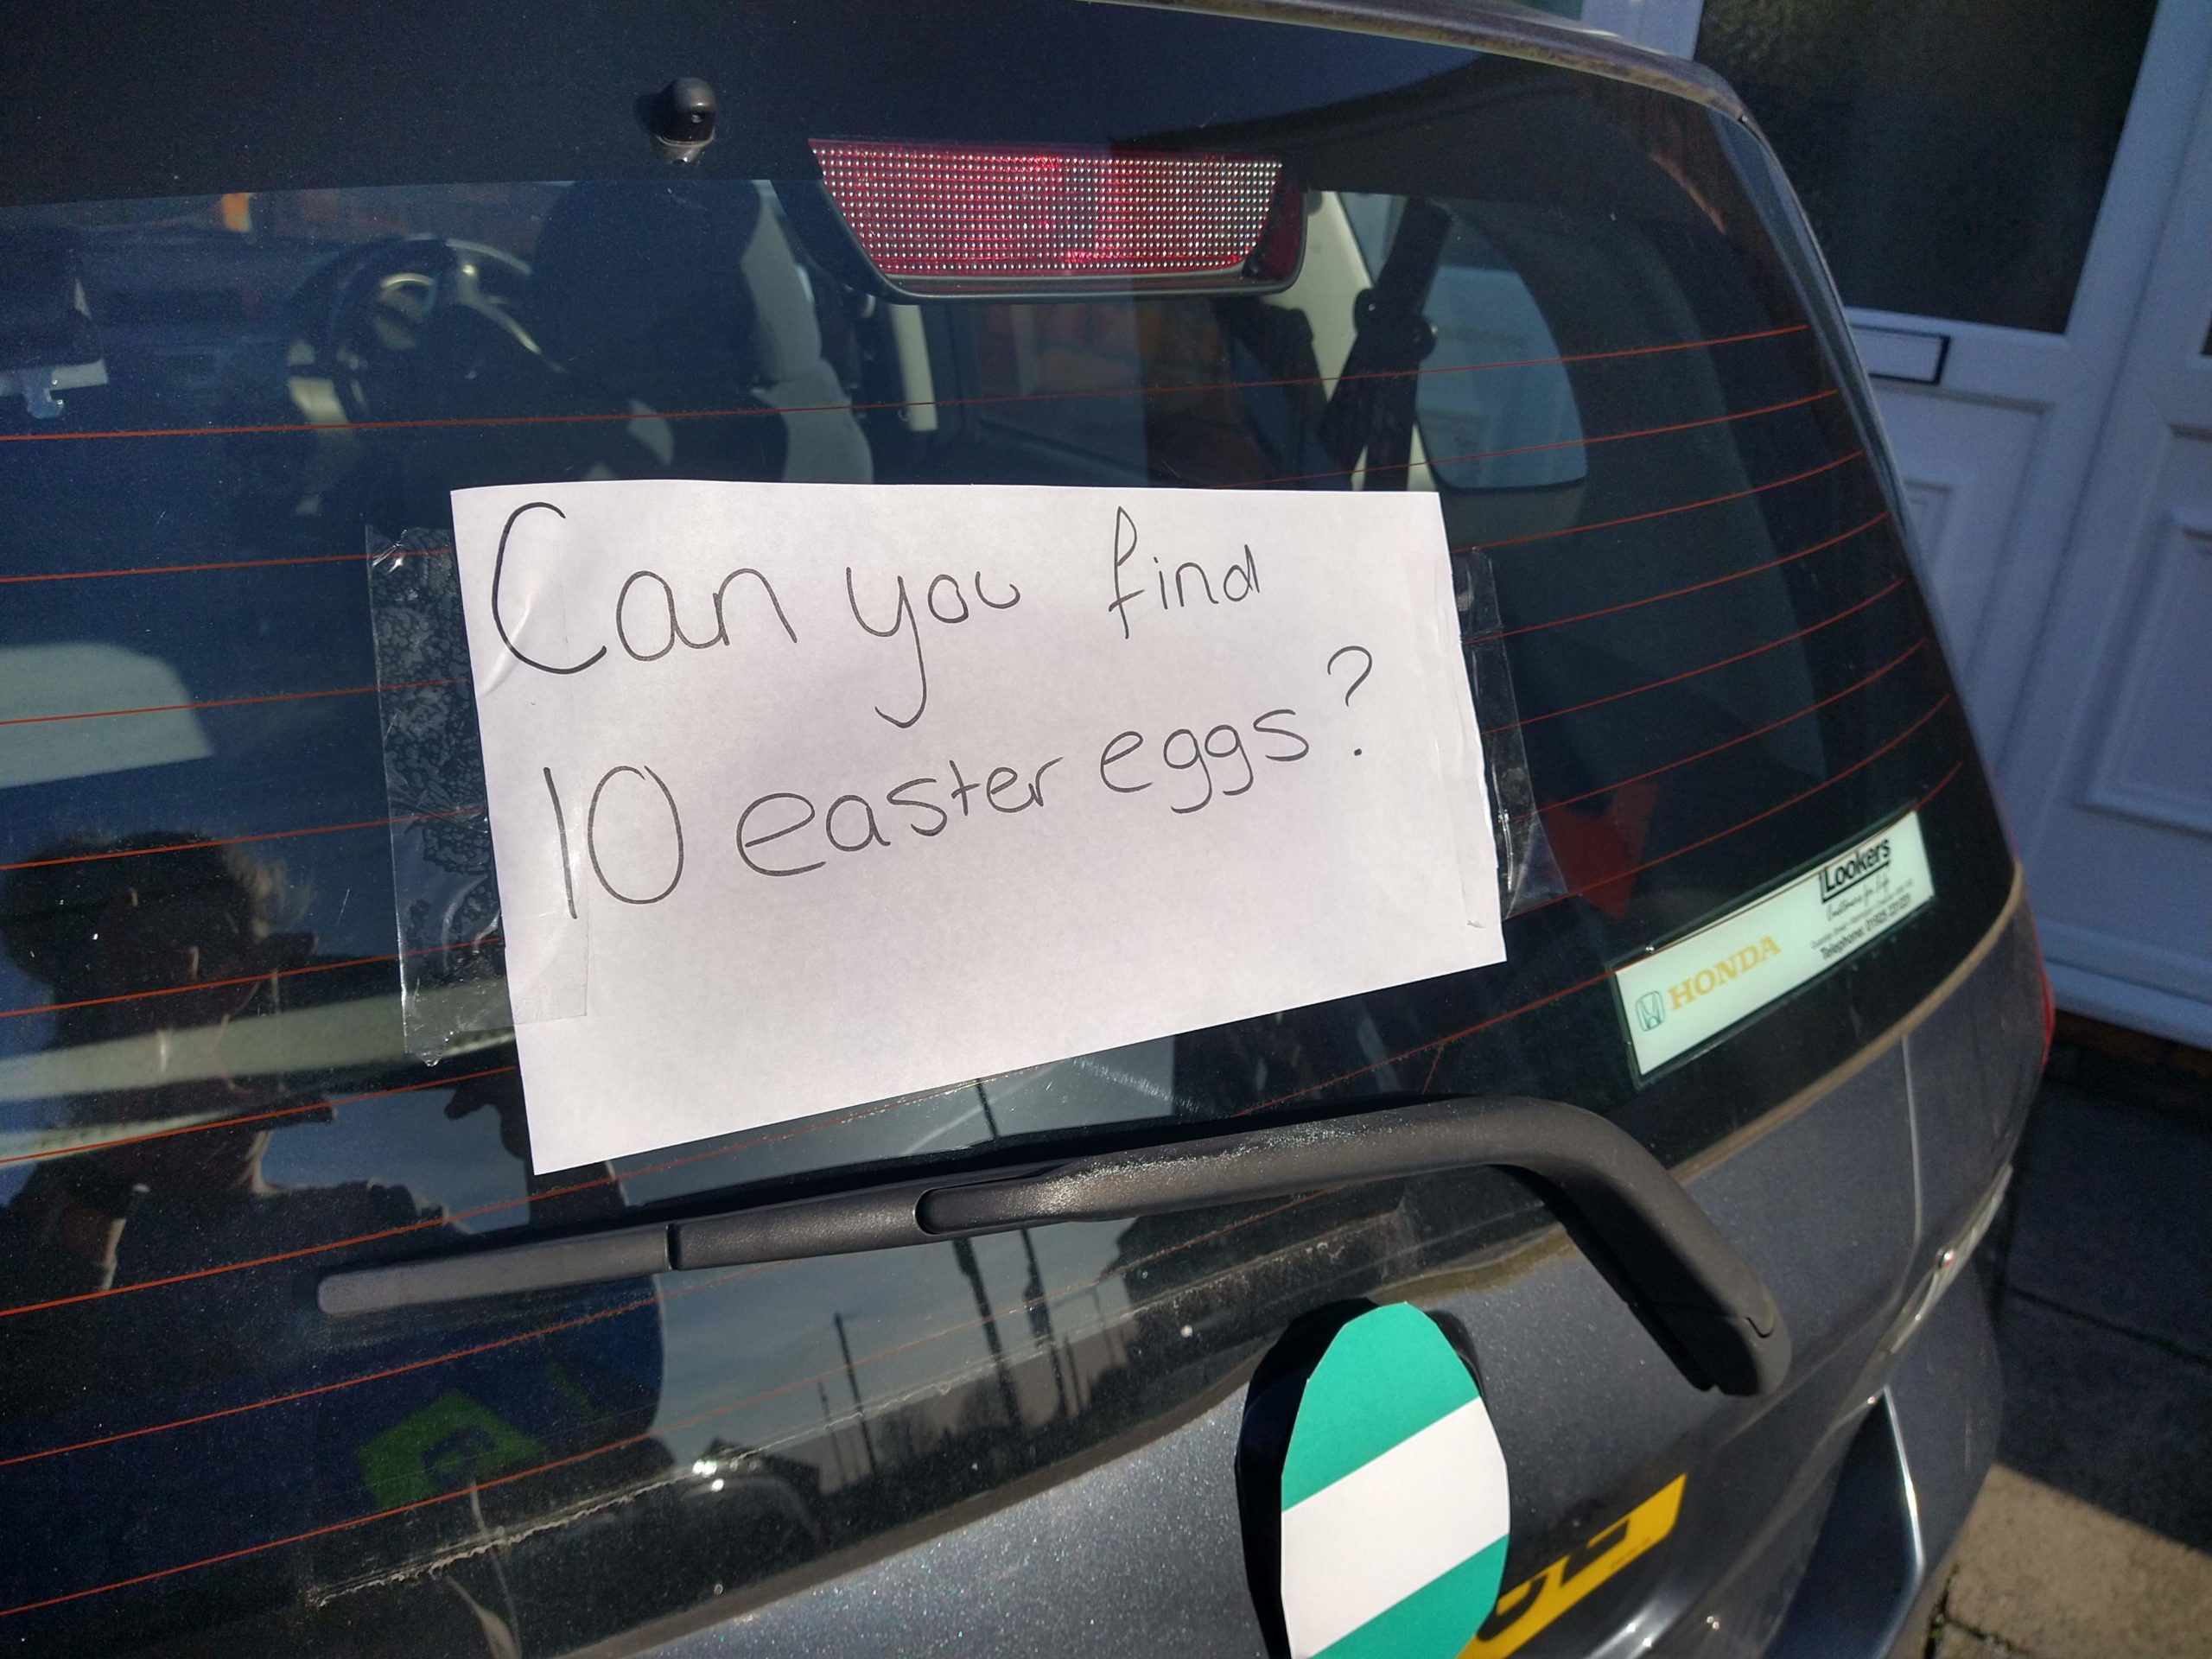 A car window with a aper sign in the window saying 'Can you find 10 easter eggs?' there is a turquoise peice of caedboard shaped like a large egg with a white stripe.